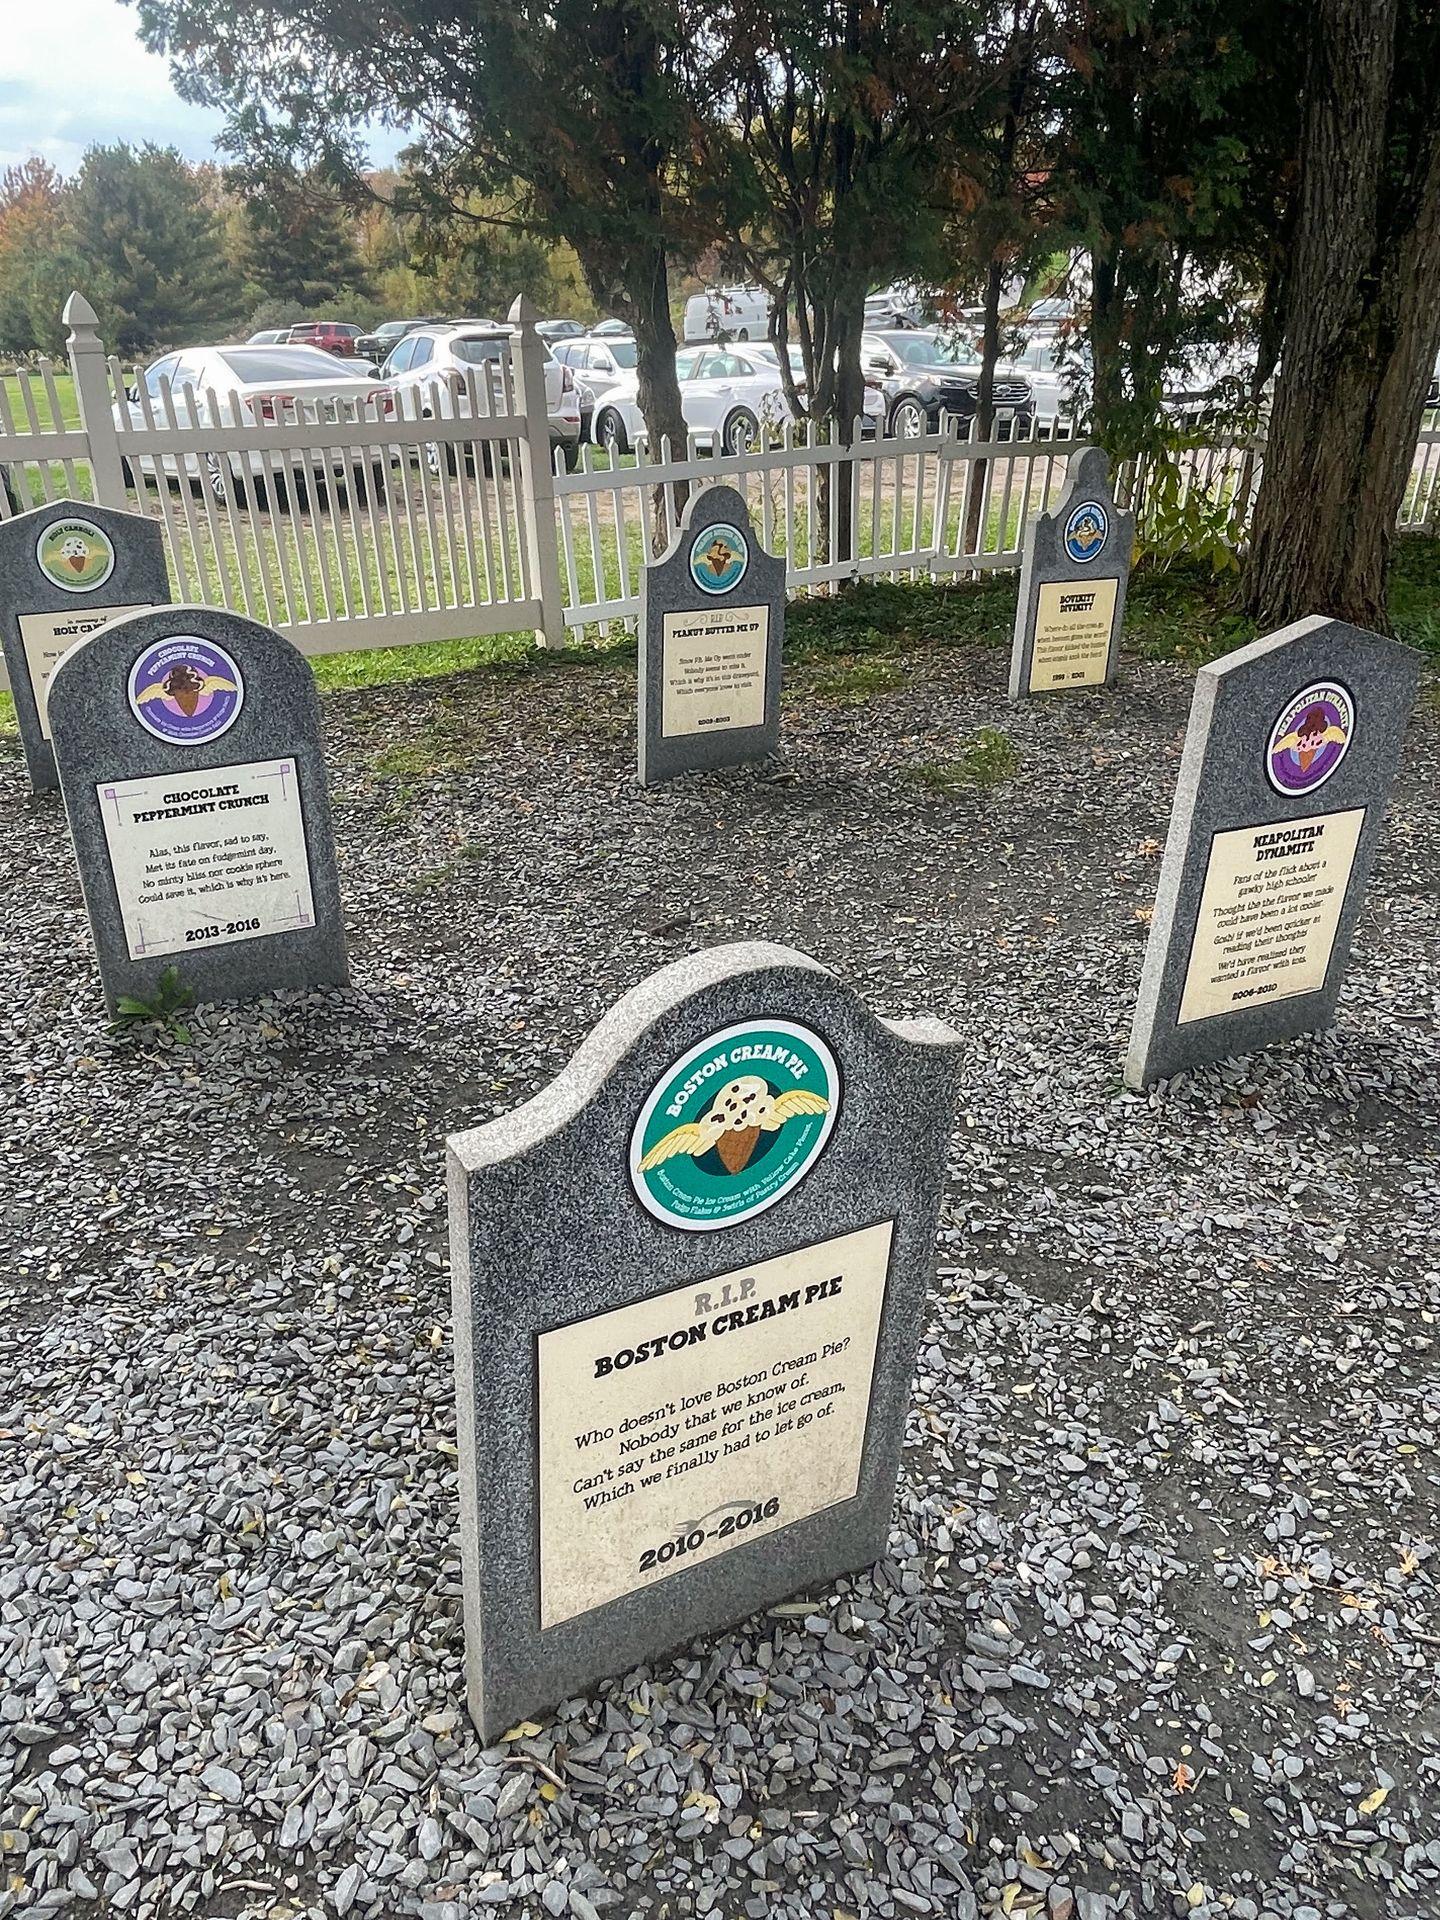 A series of gravestones that depict former ice cream flavors from Ben and Jerry's